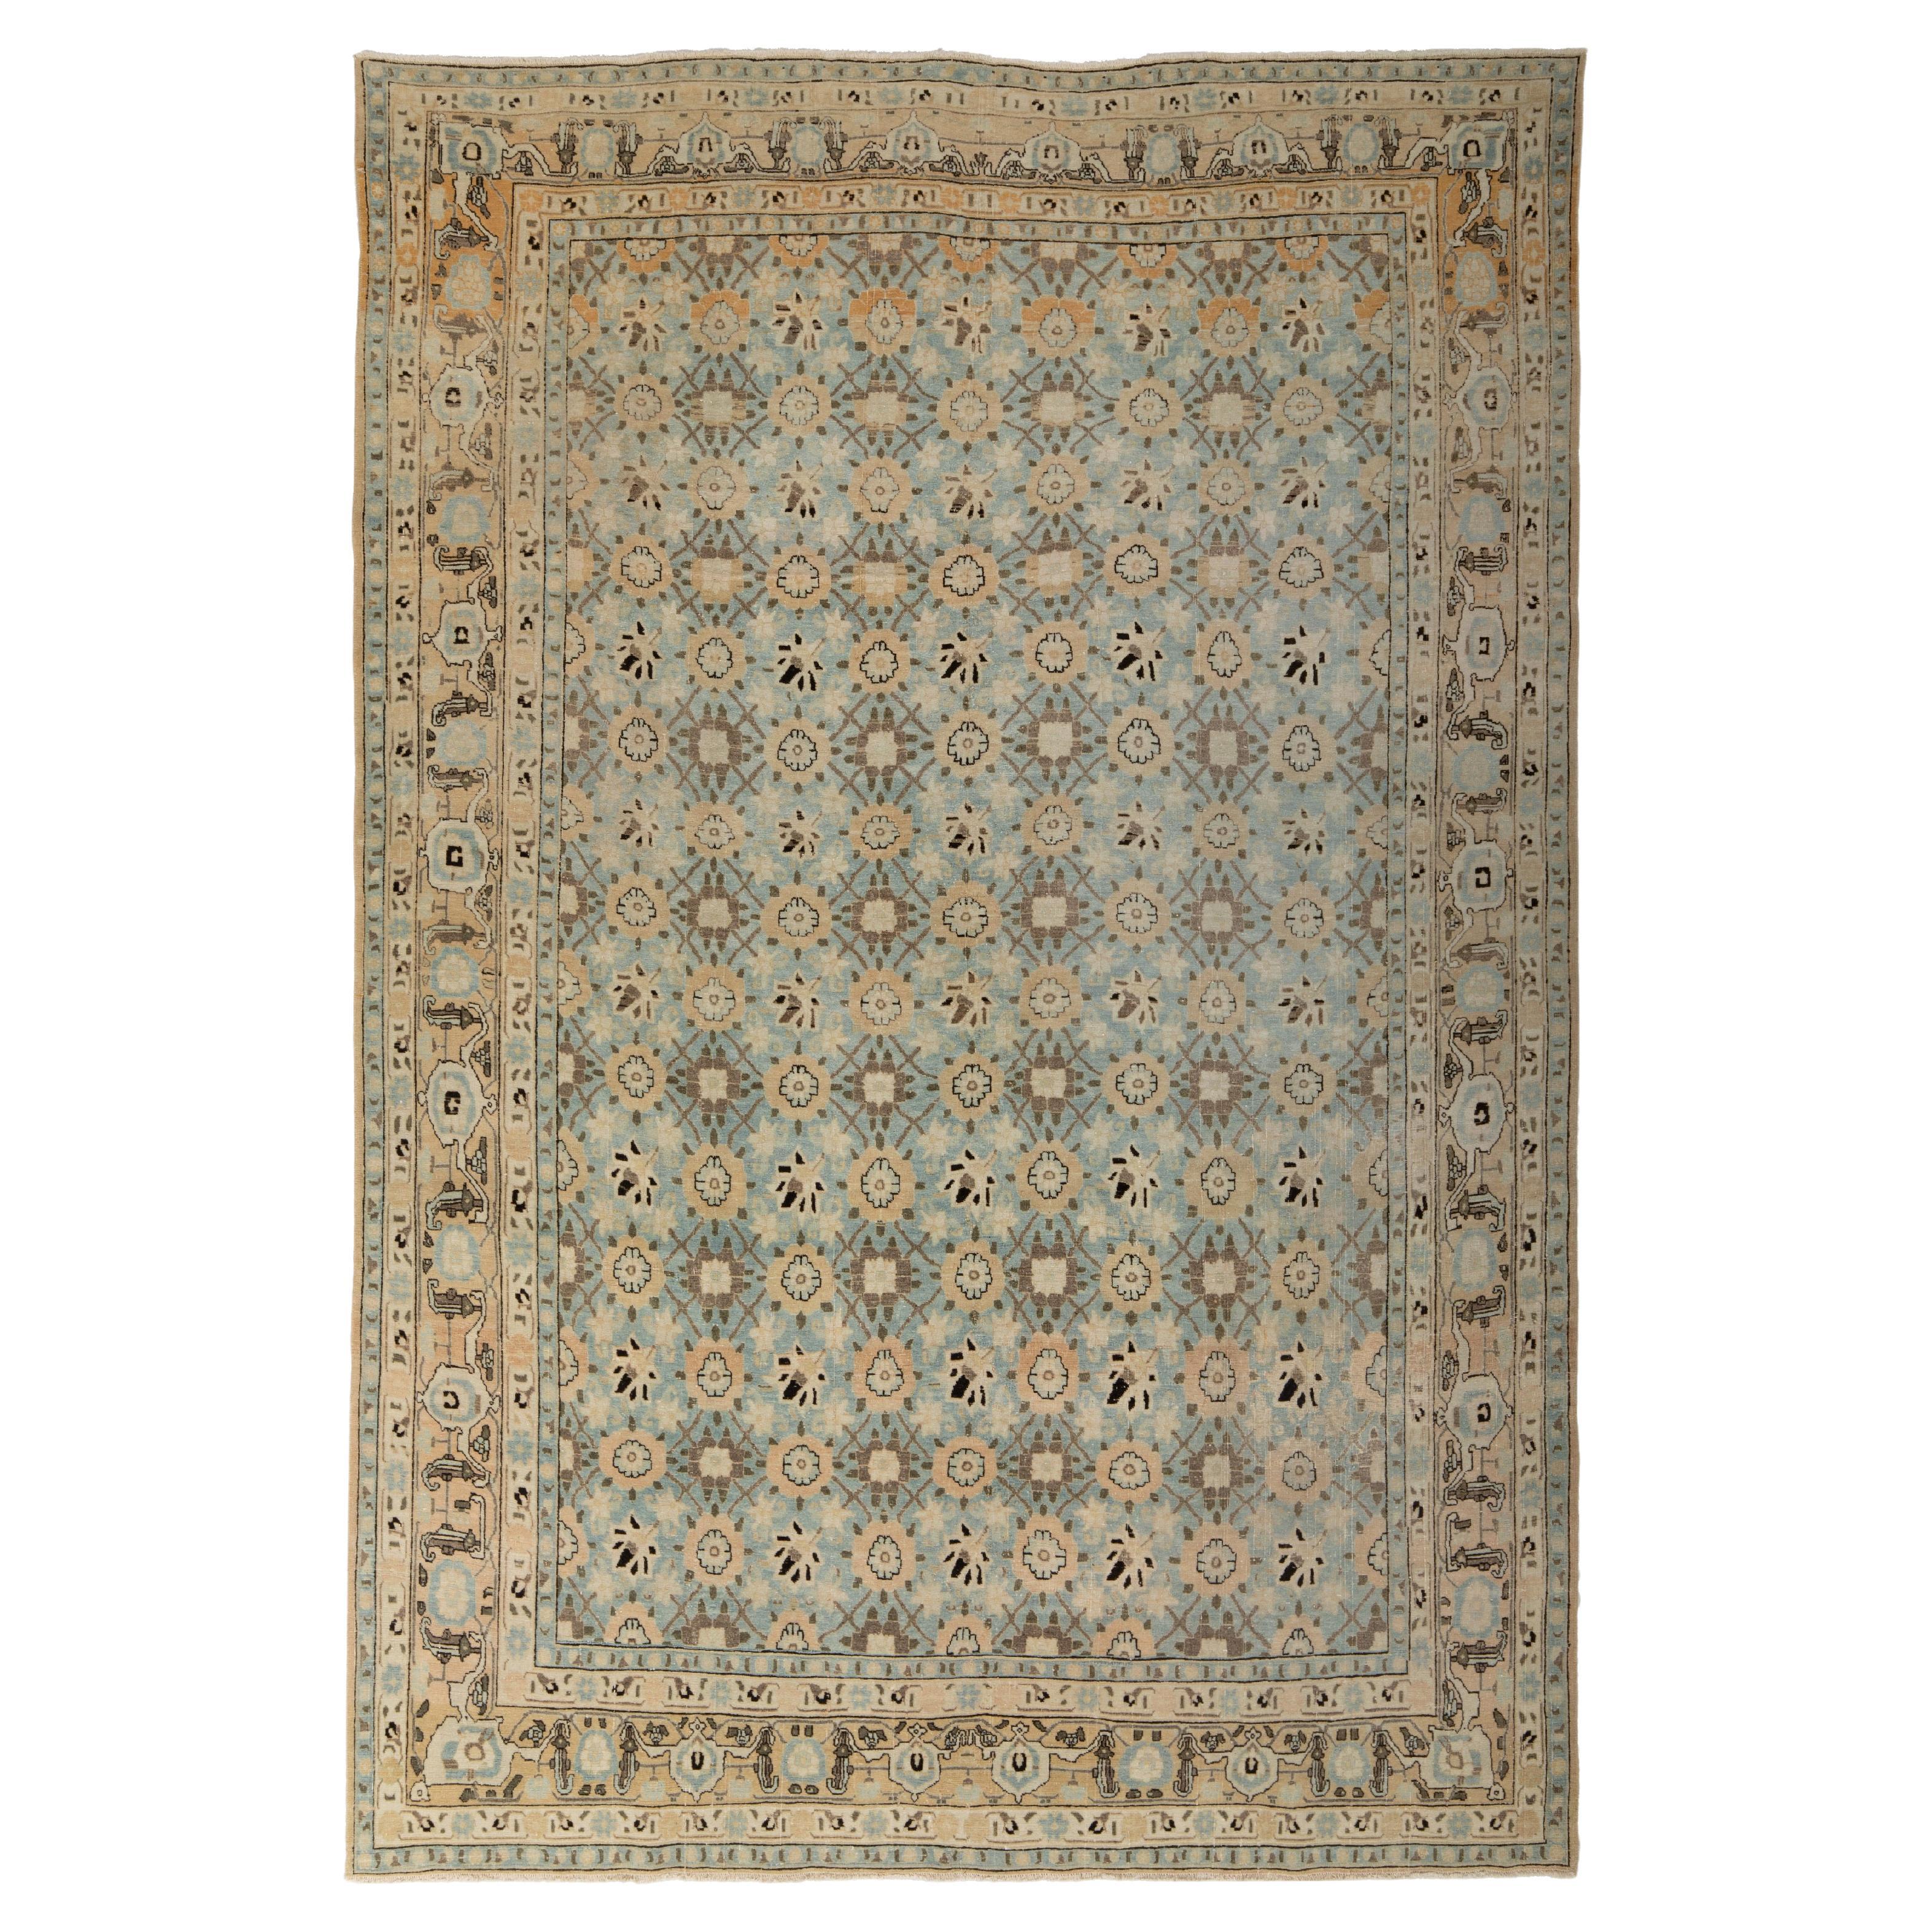 abc carpet Vintage Traditional Wool Rug - 6'9" x 10' For Sale